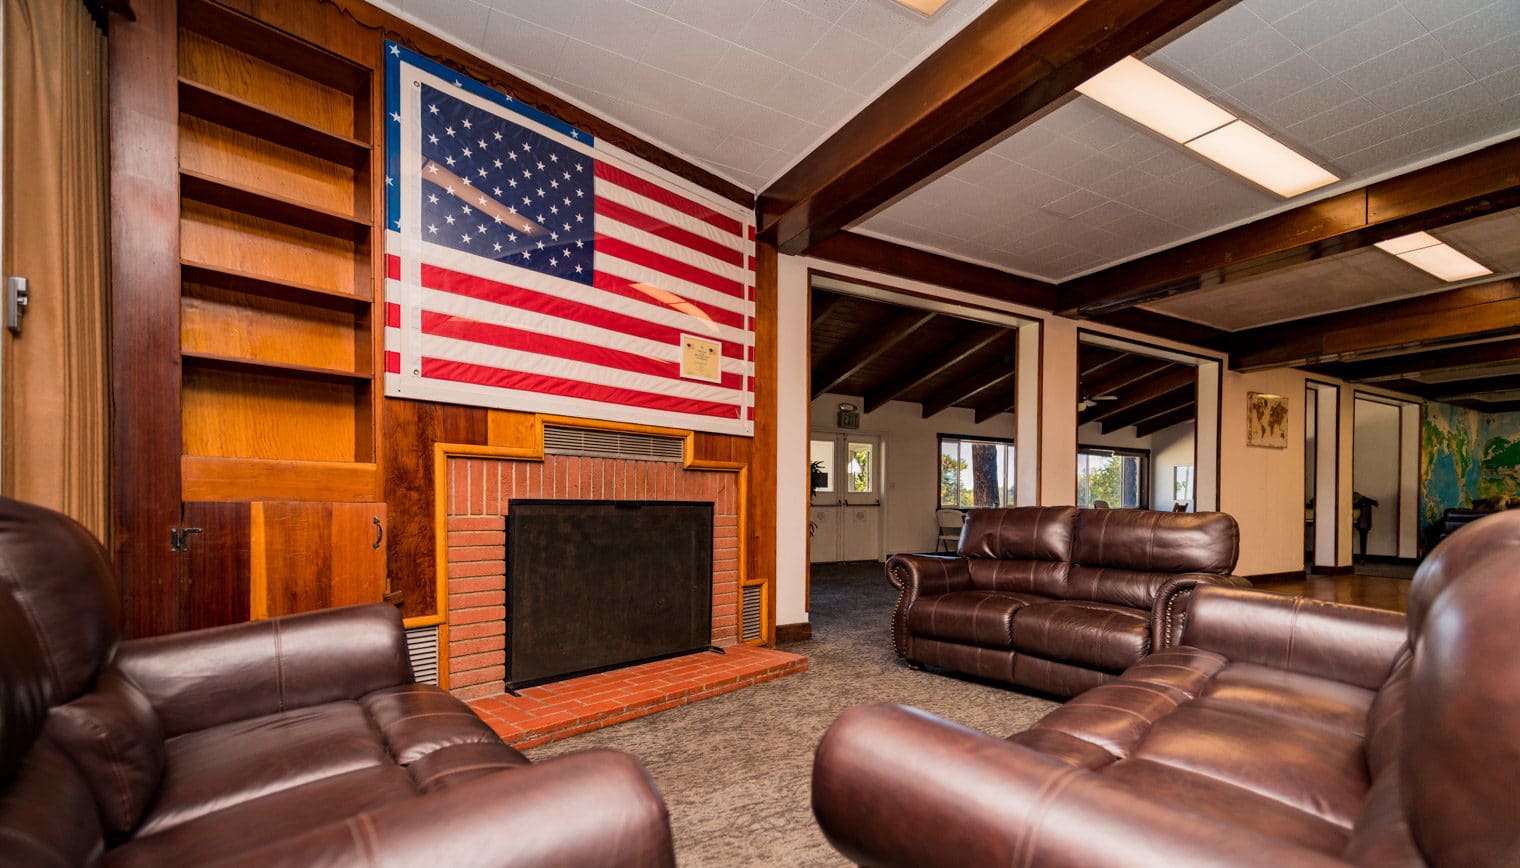 A living room space in the Lodge.